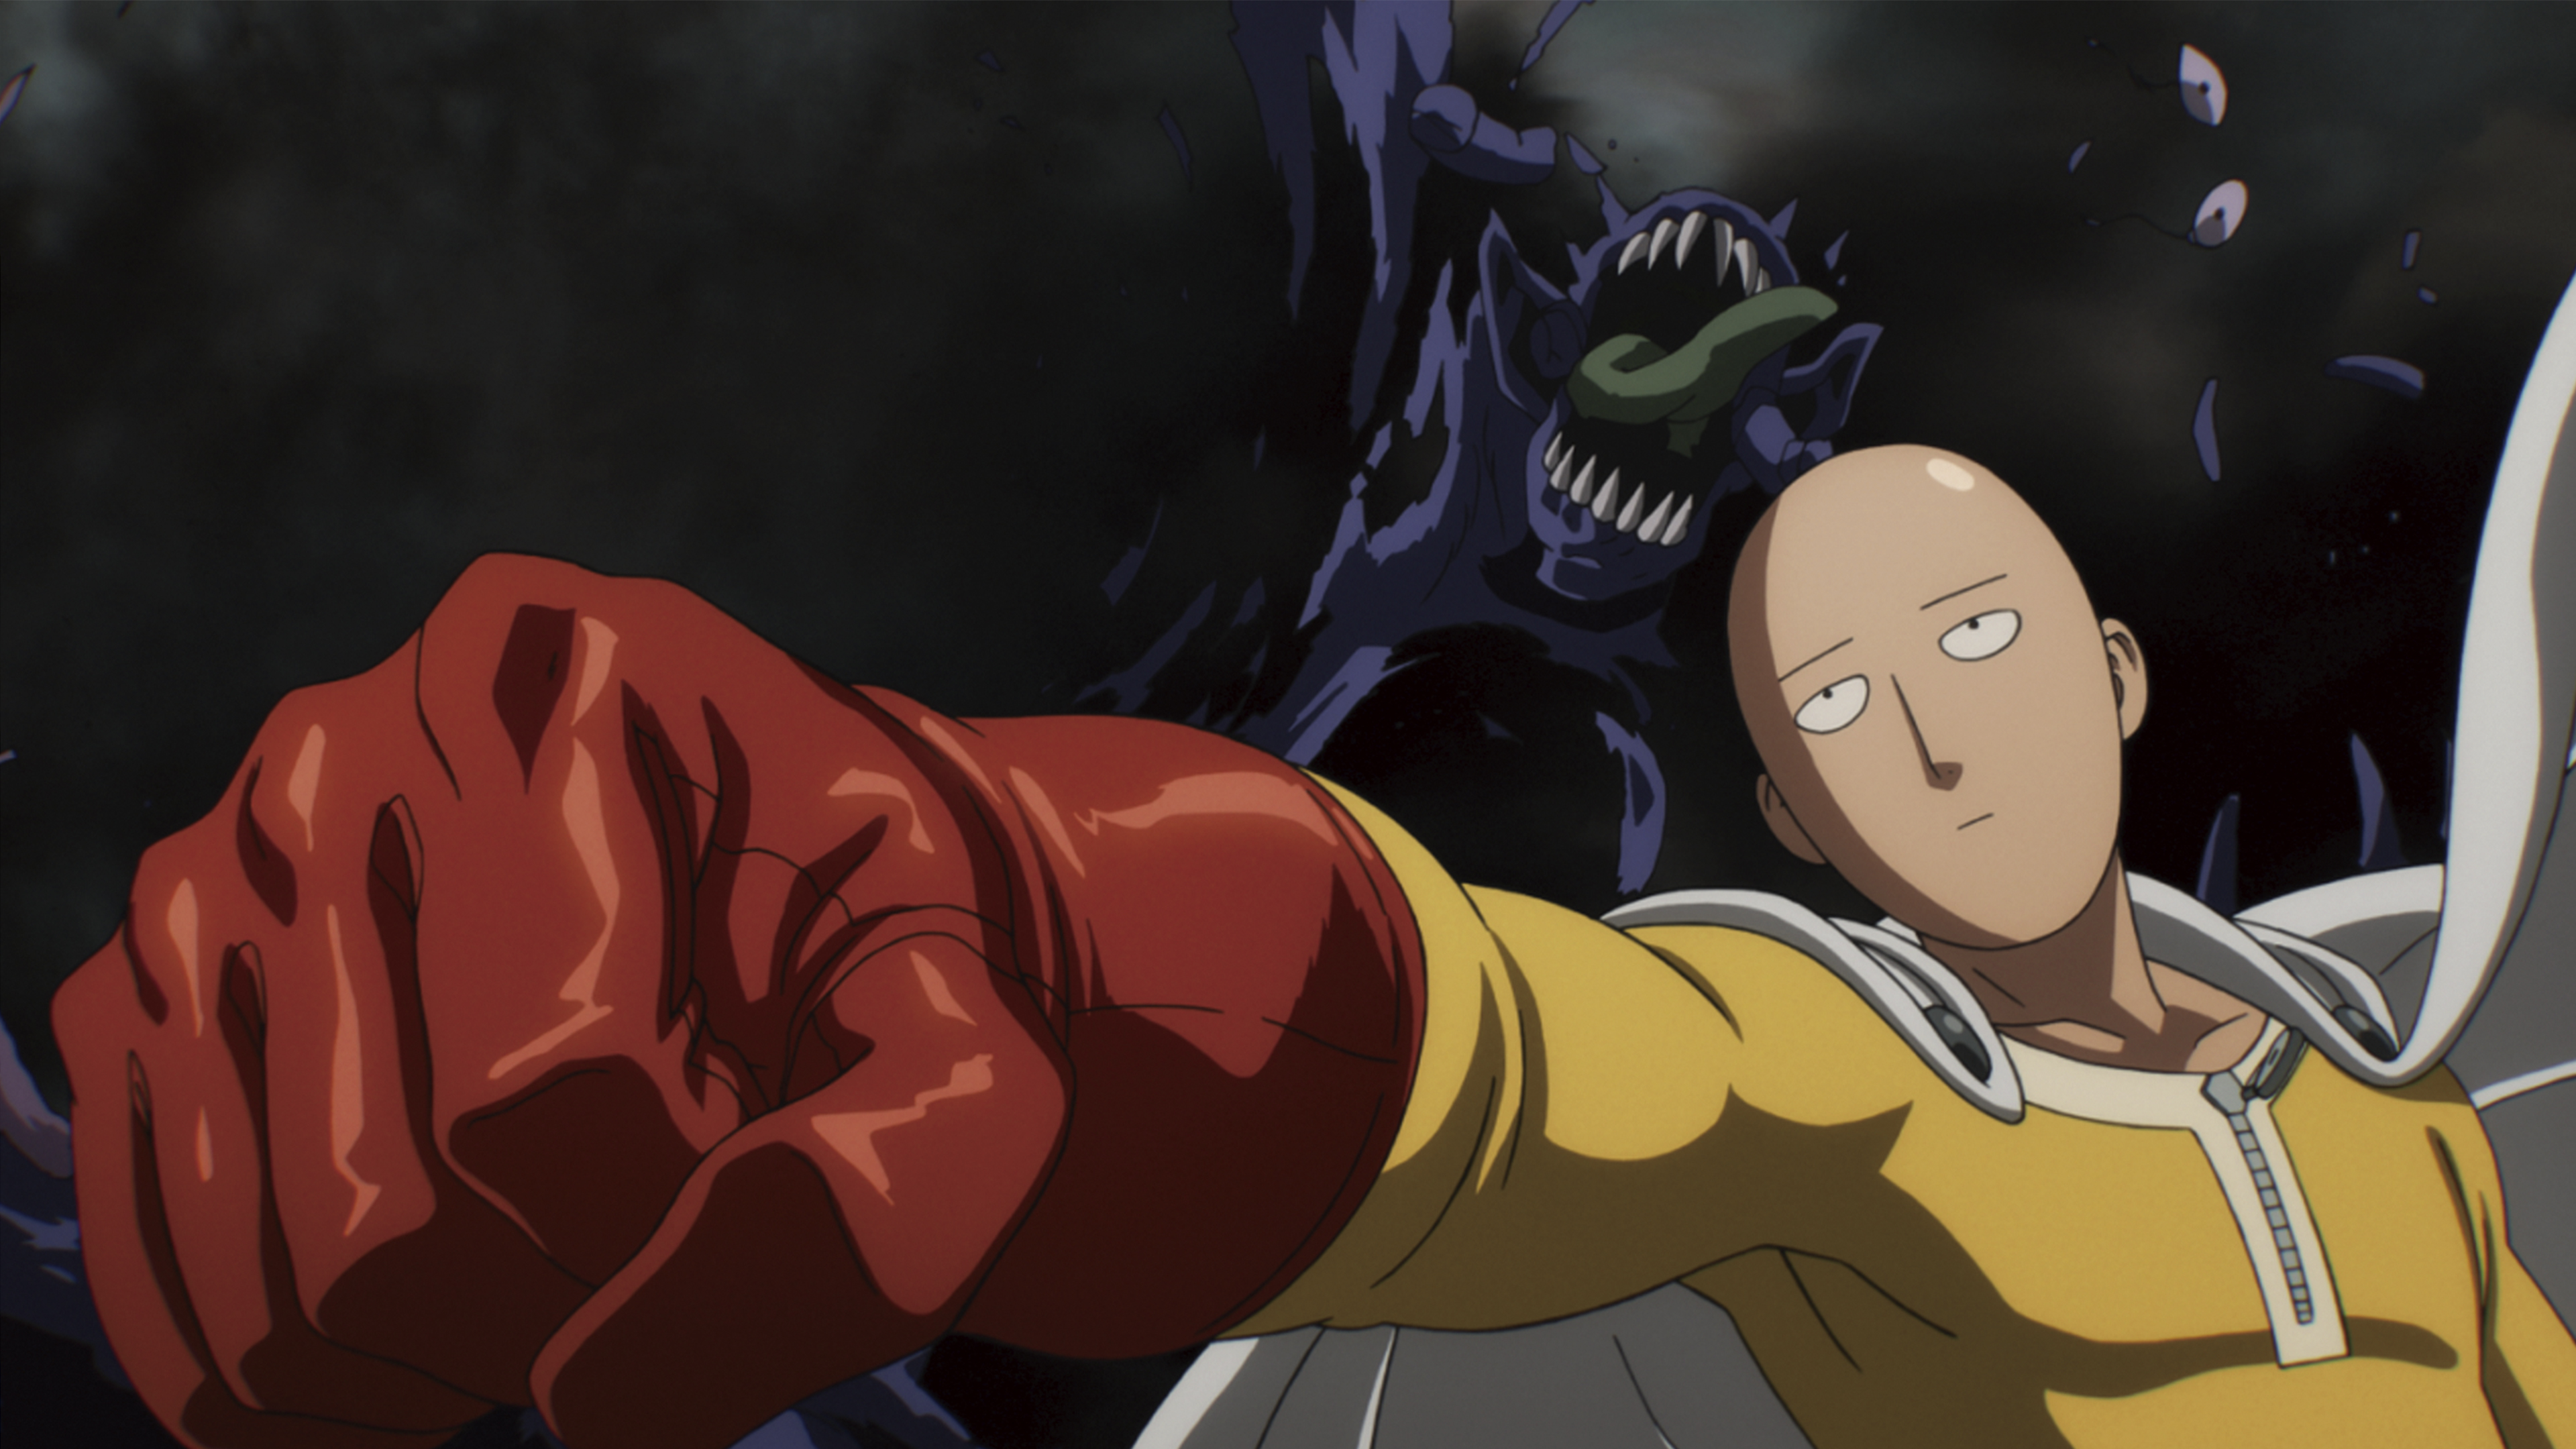 Punch man episode 12 english dubbed anime convo